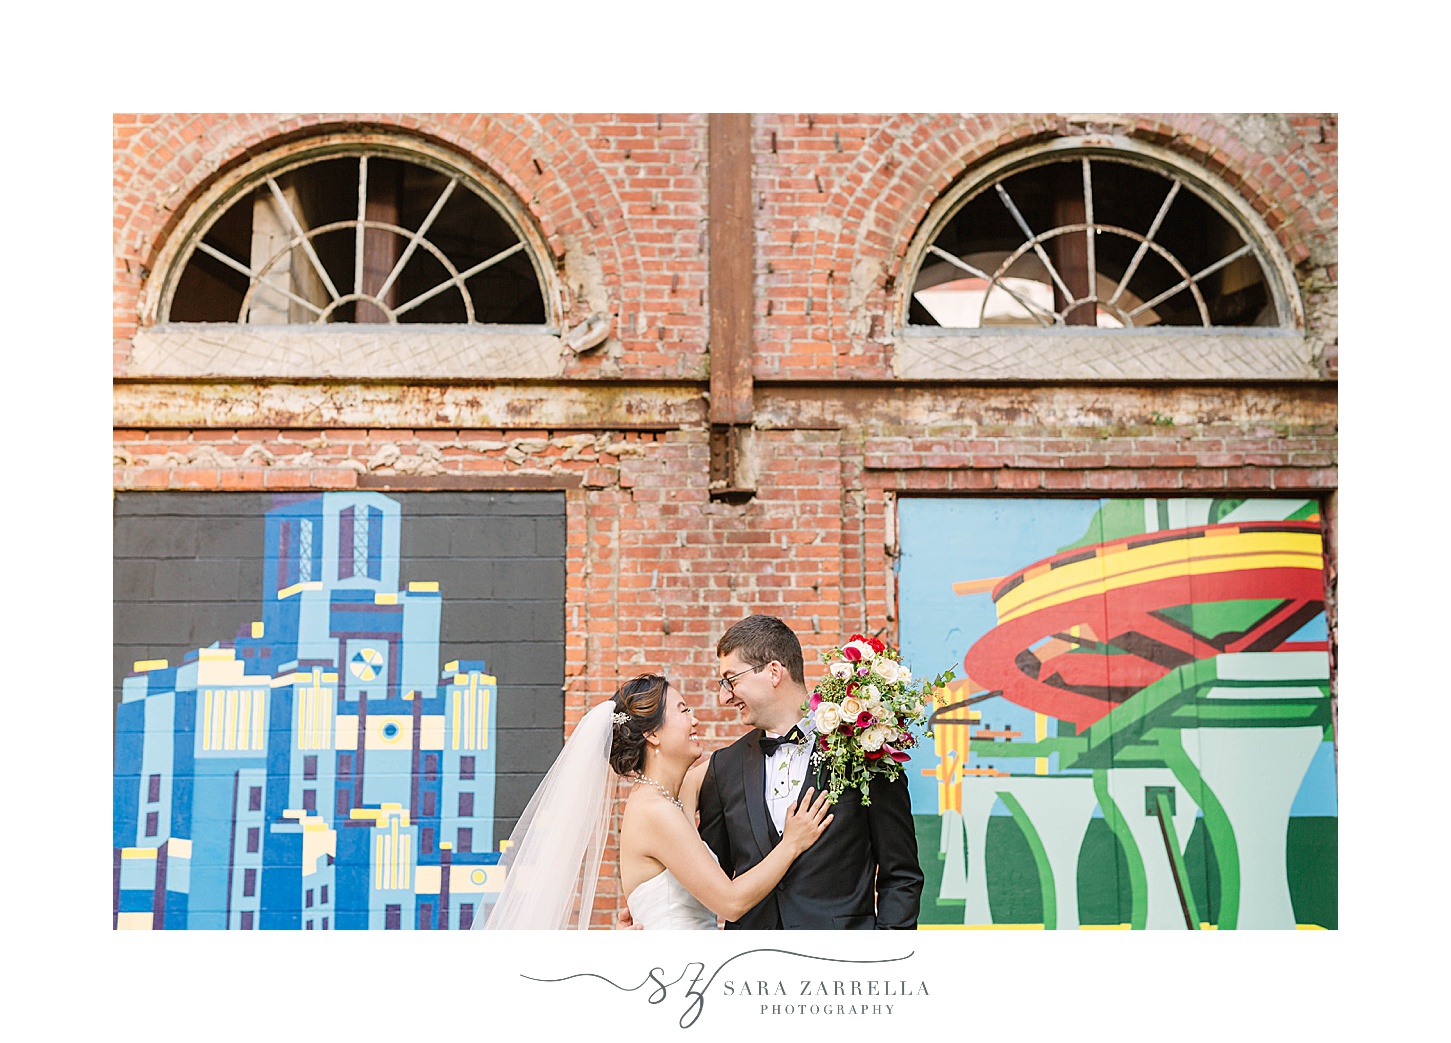 newlyweds pose by murals in Downtown Providence